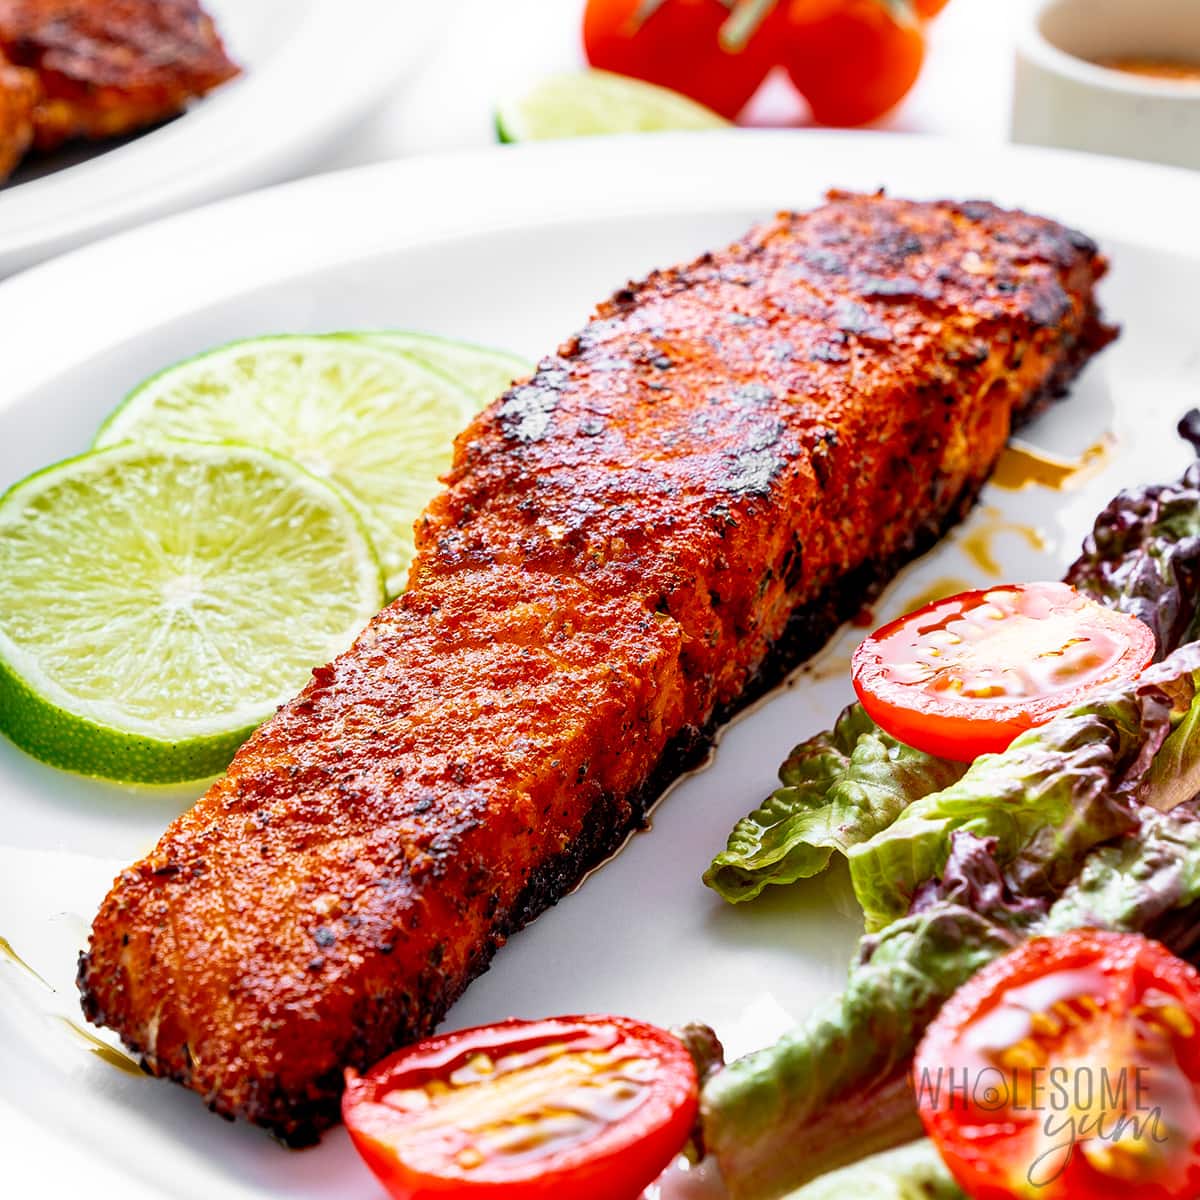 Blackened salmon on a plate.